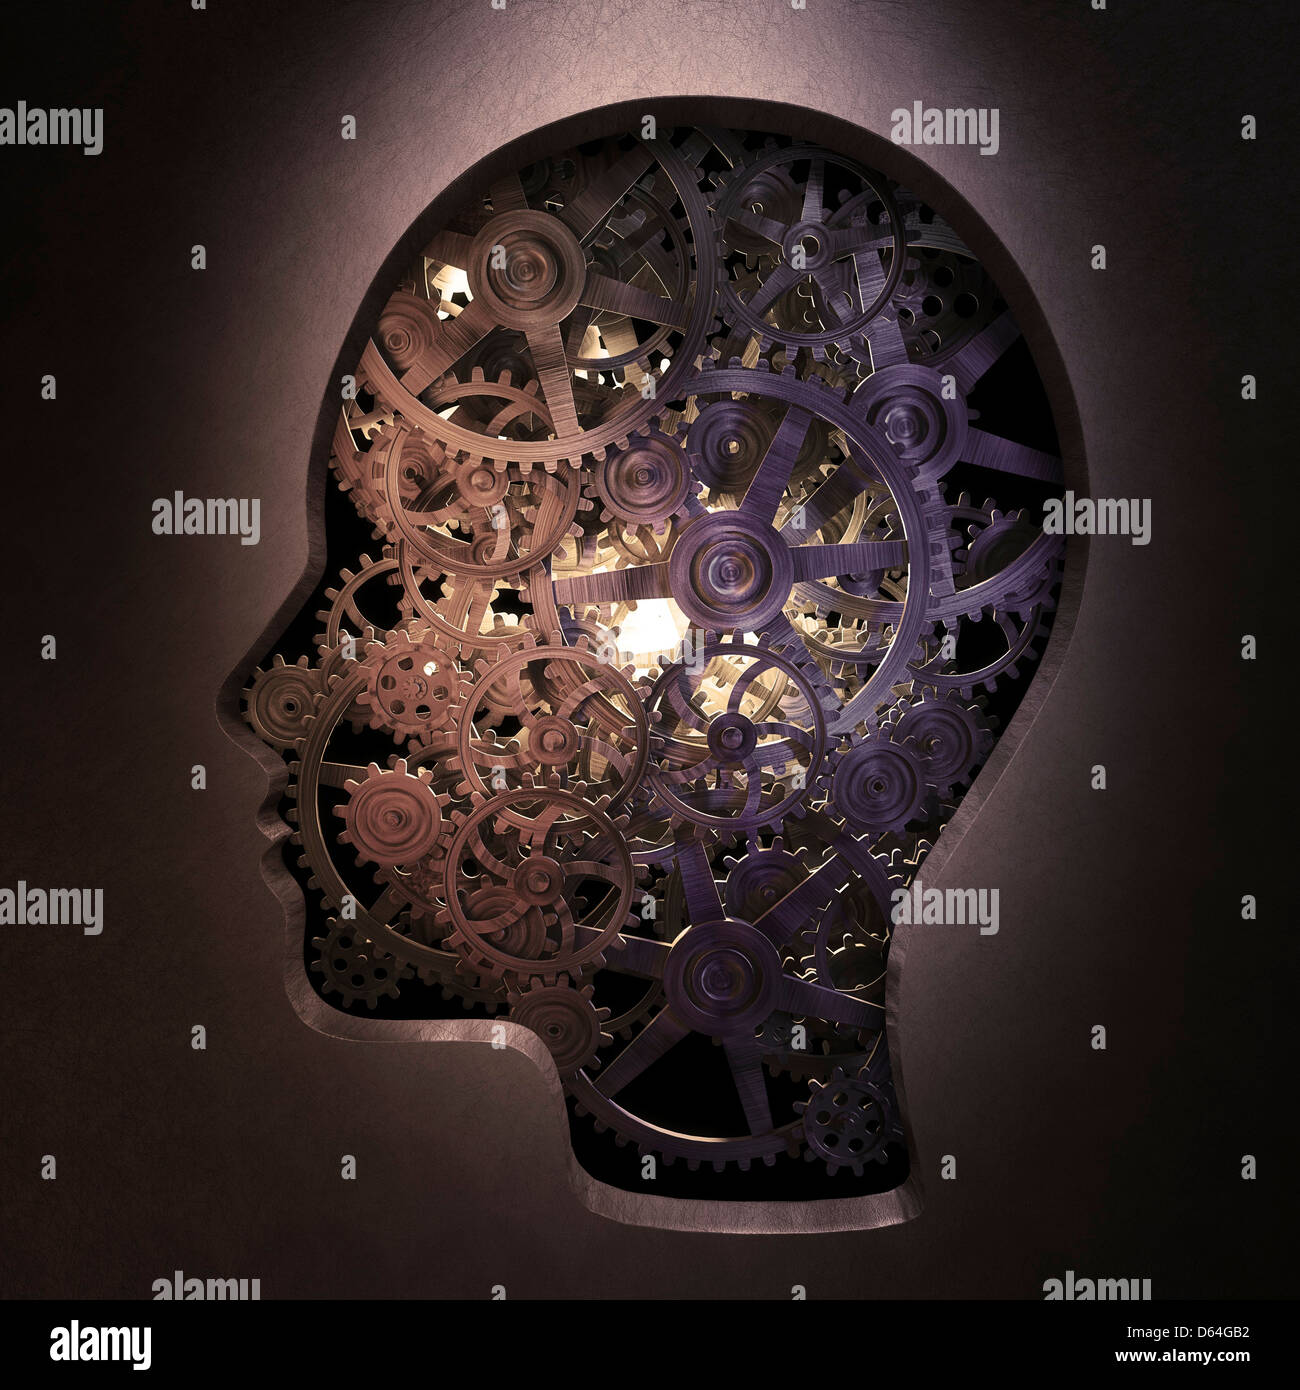 Thought processes, conceptual artwork Stock Photo